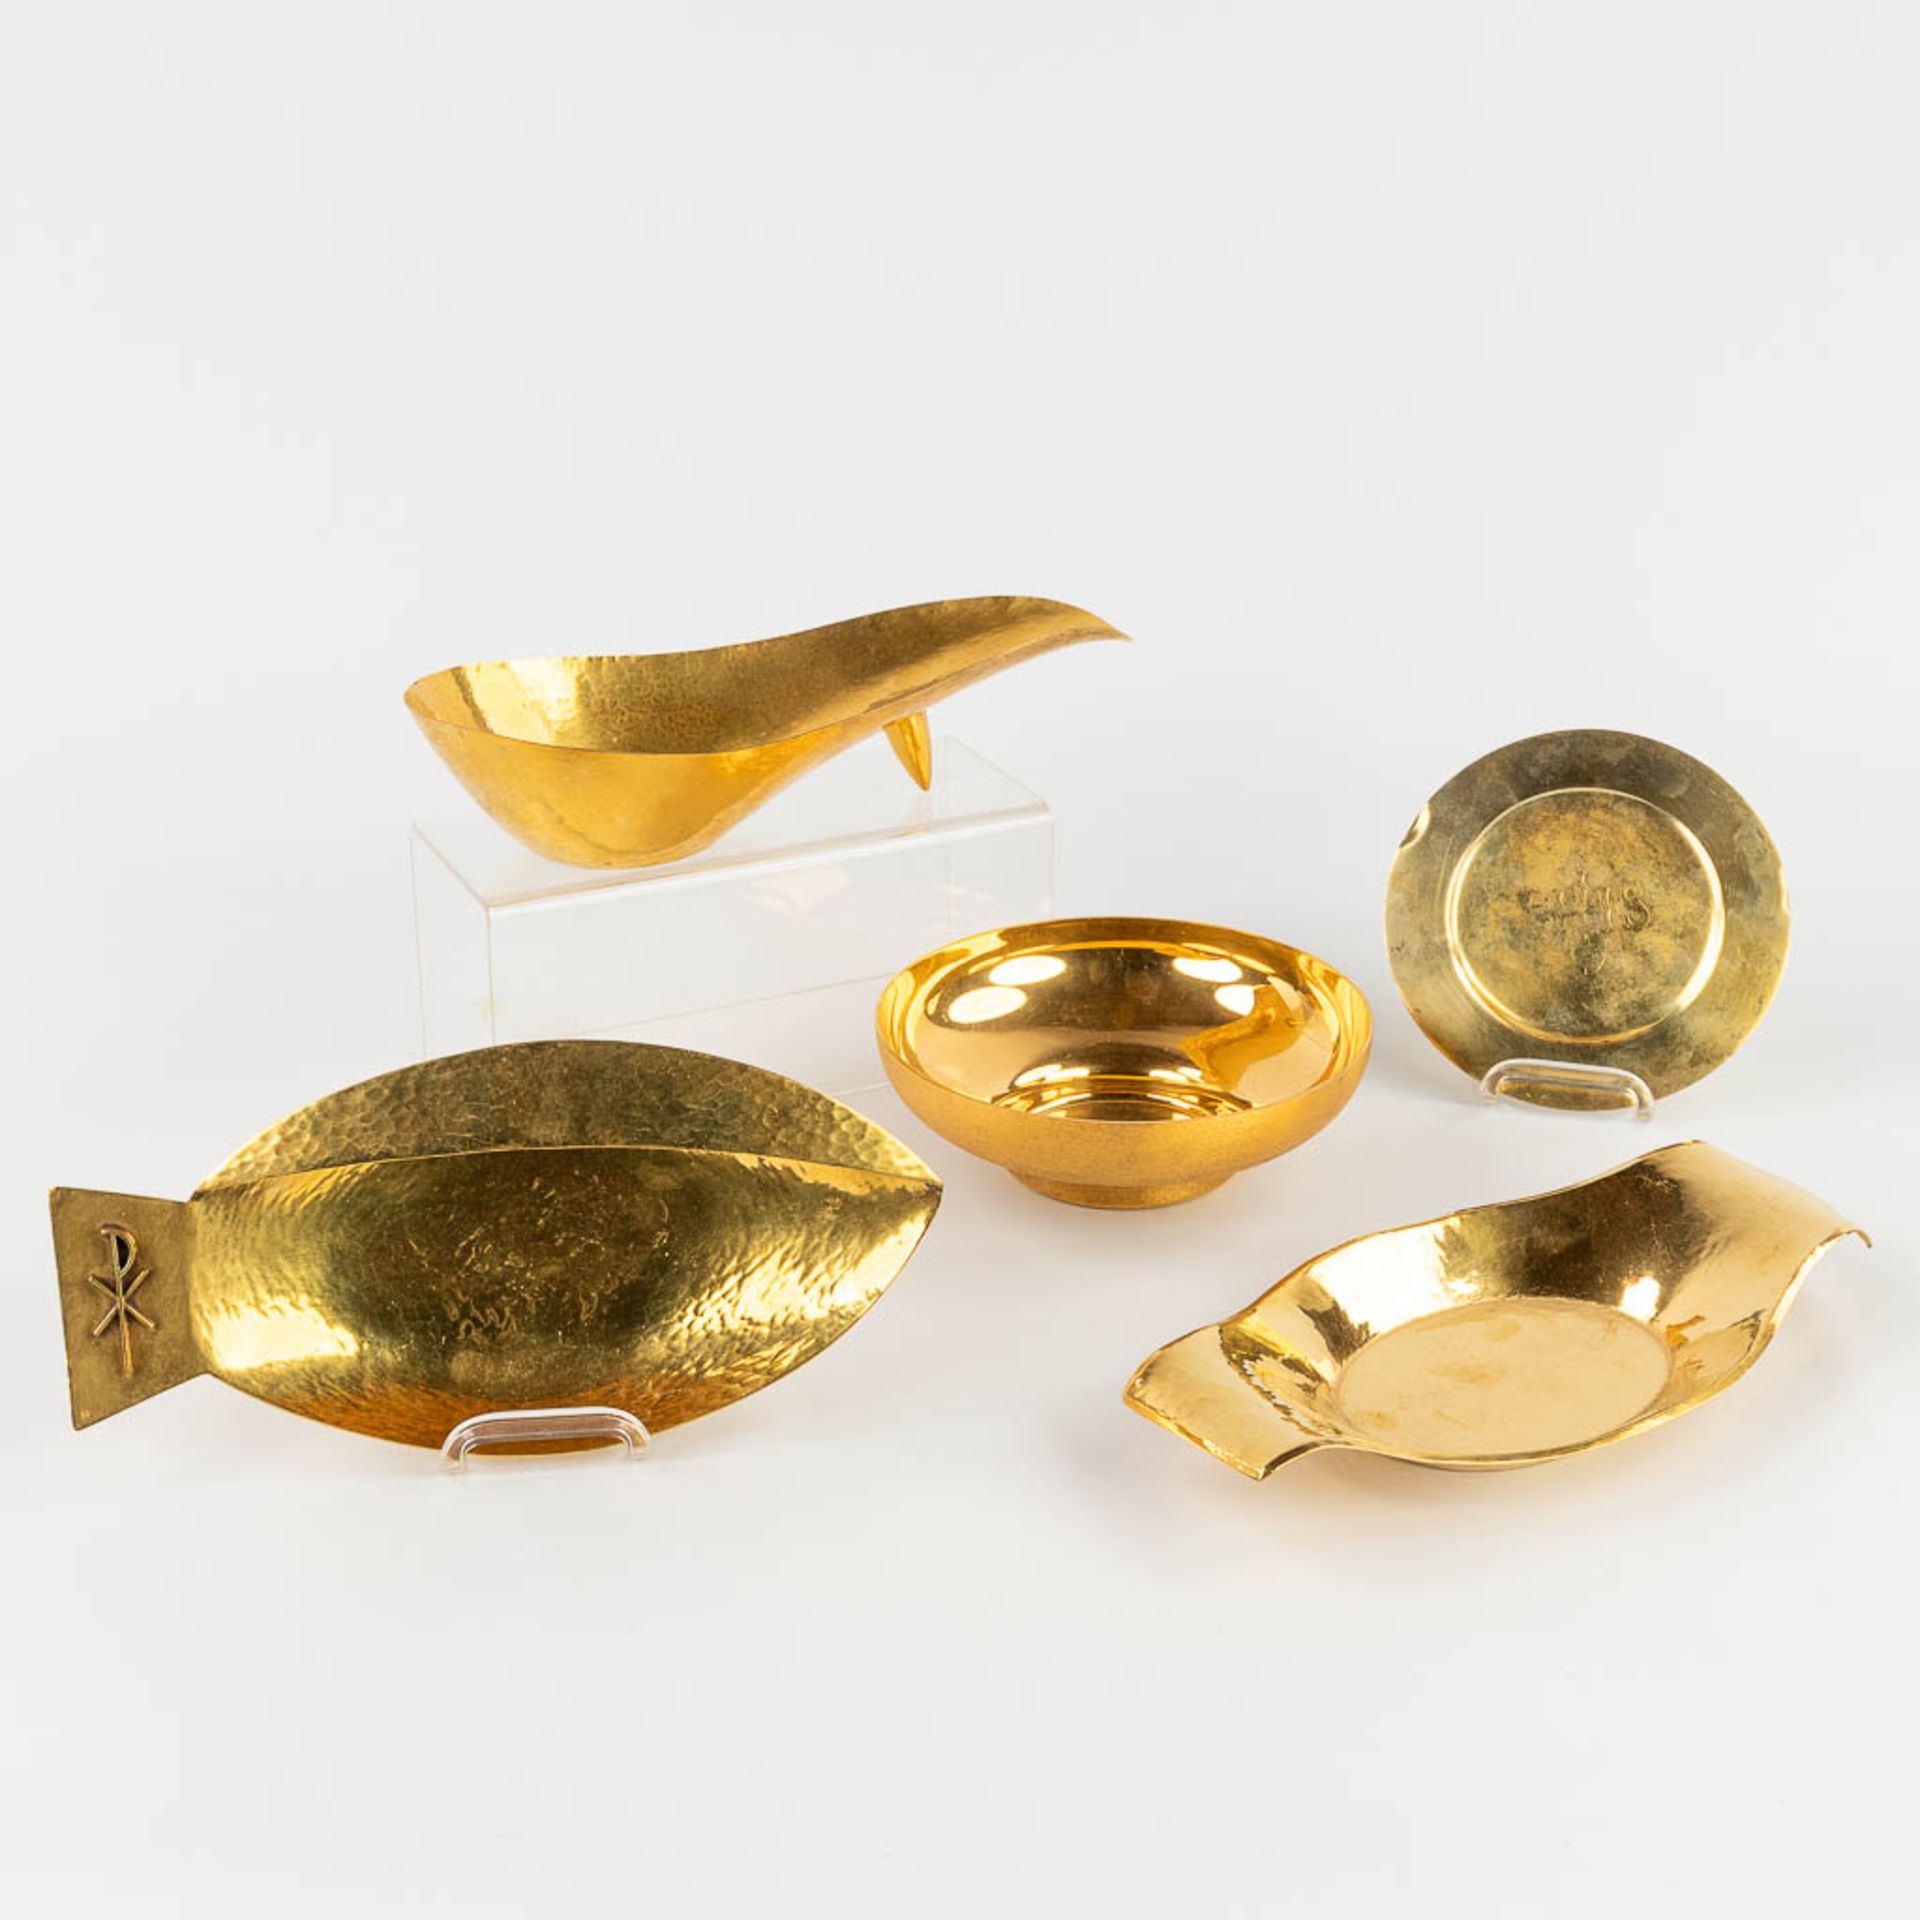 A collection of 4 sacred bread trays, gold-plated metal, added a paten made of silver. 20th C. (L: 1